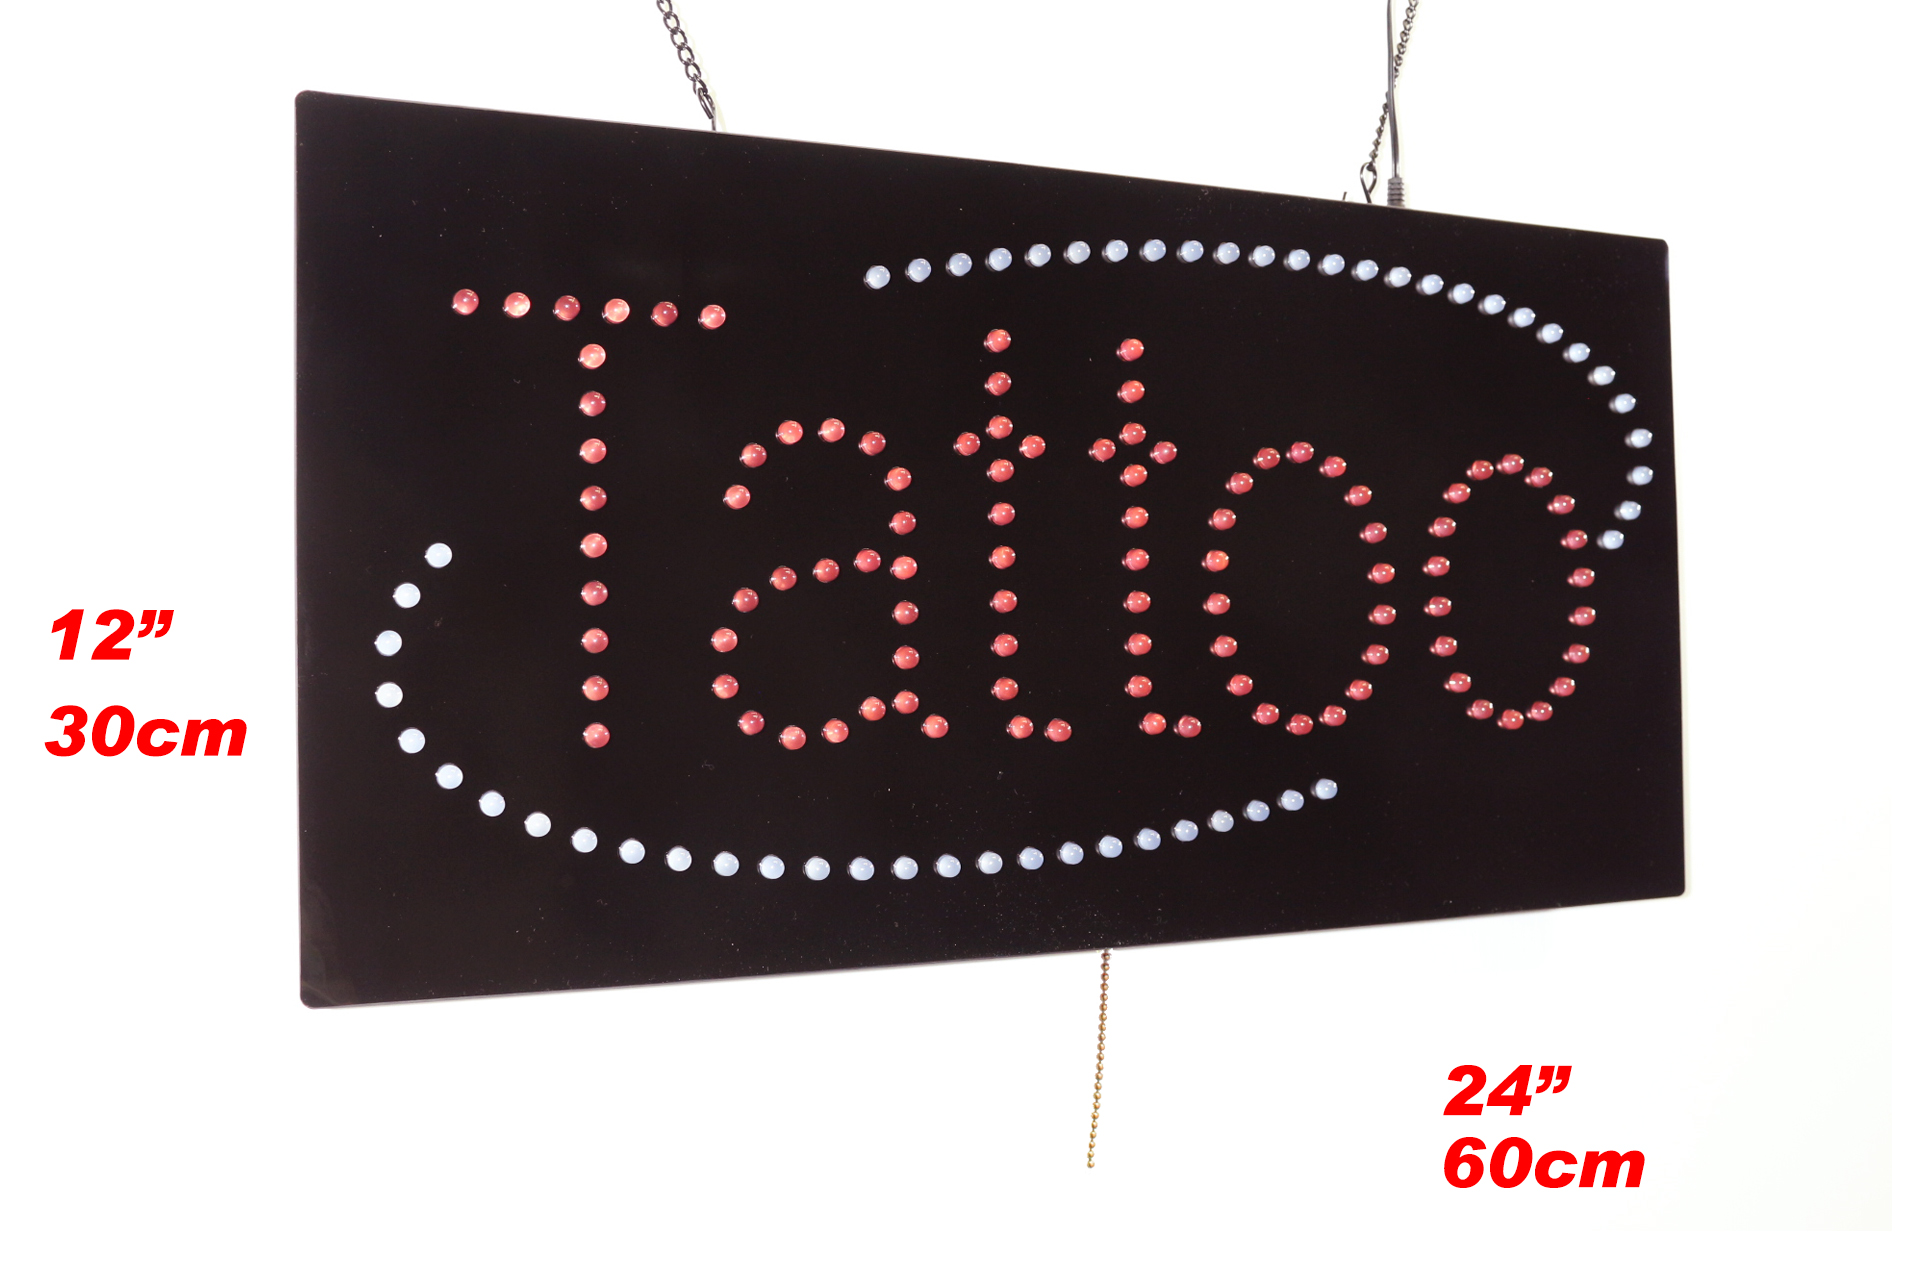 Tattoo Sign, TOPKING Signage, LED Neon Open, Store, Window, Shop, Business,  Display, Grand Opening Gift